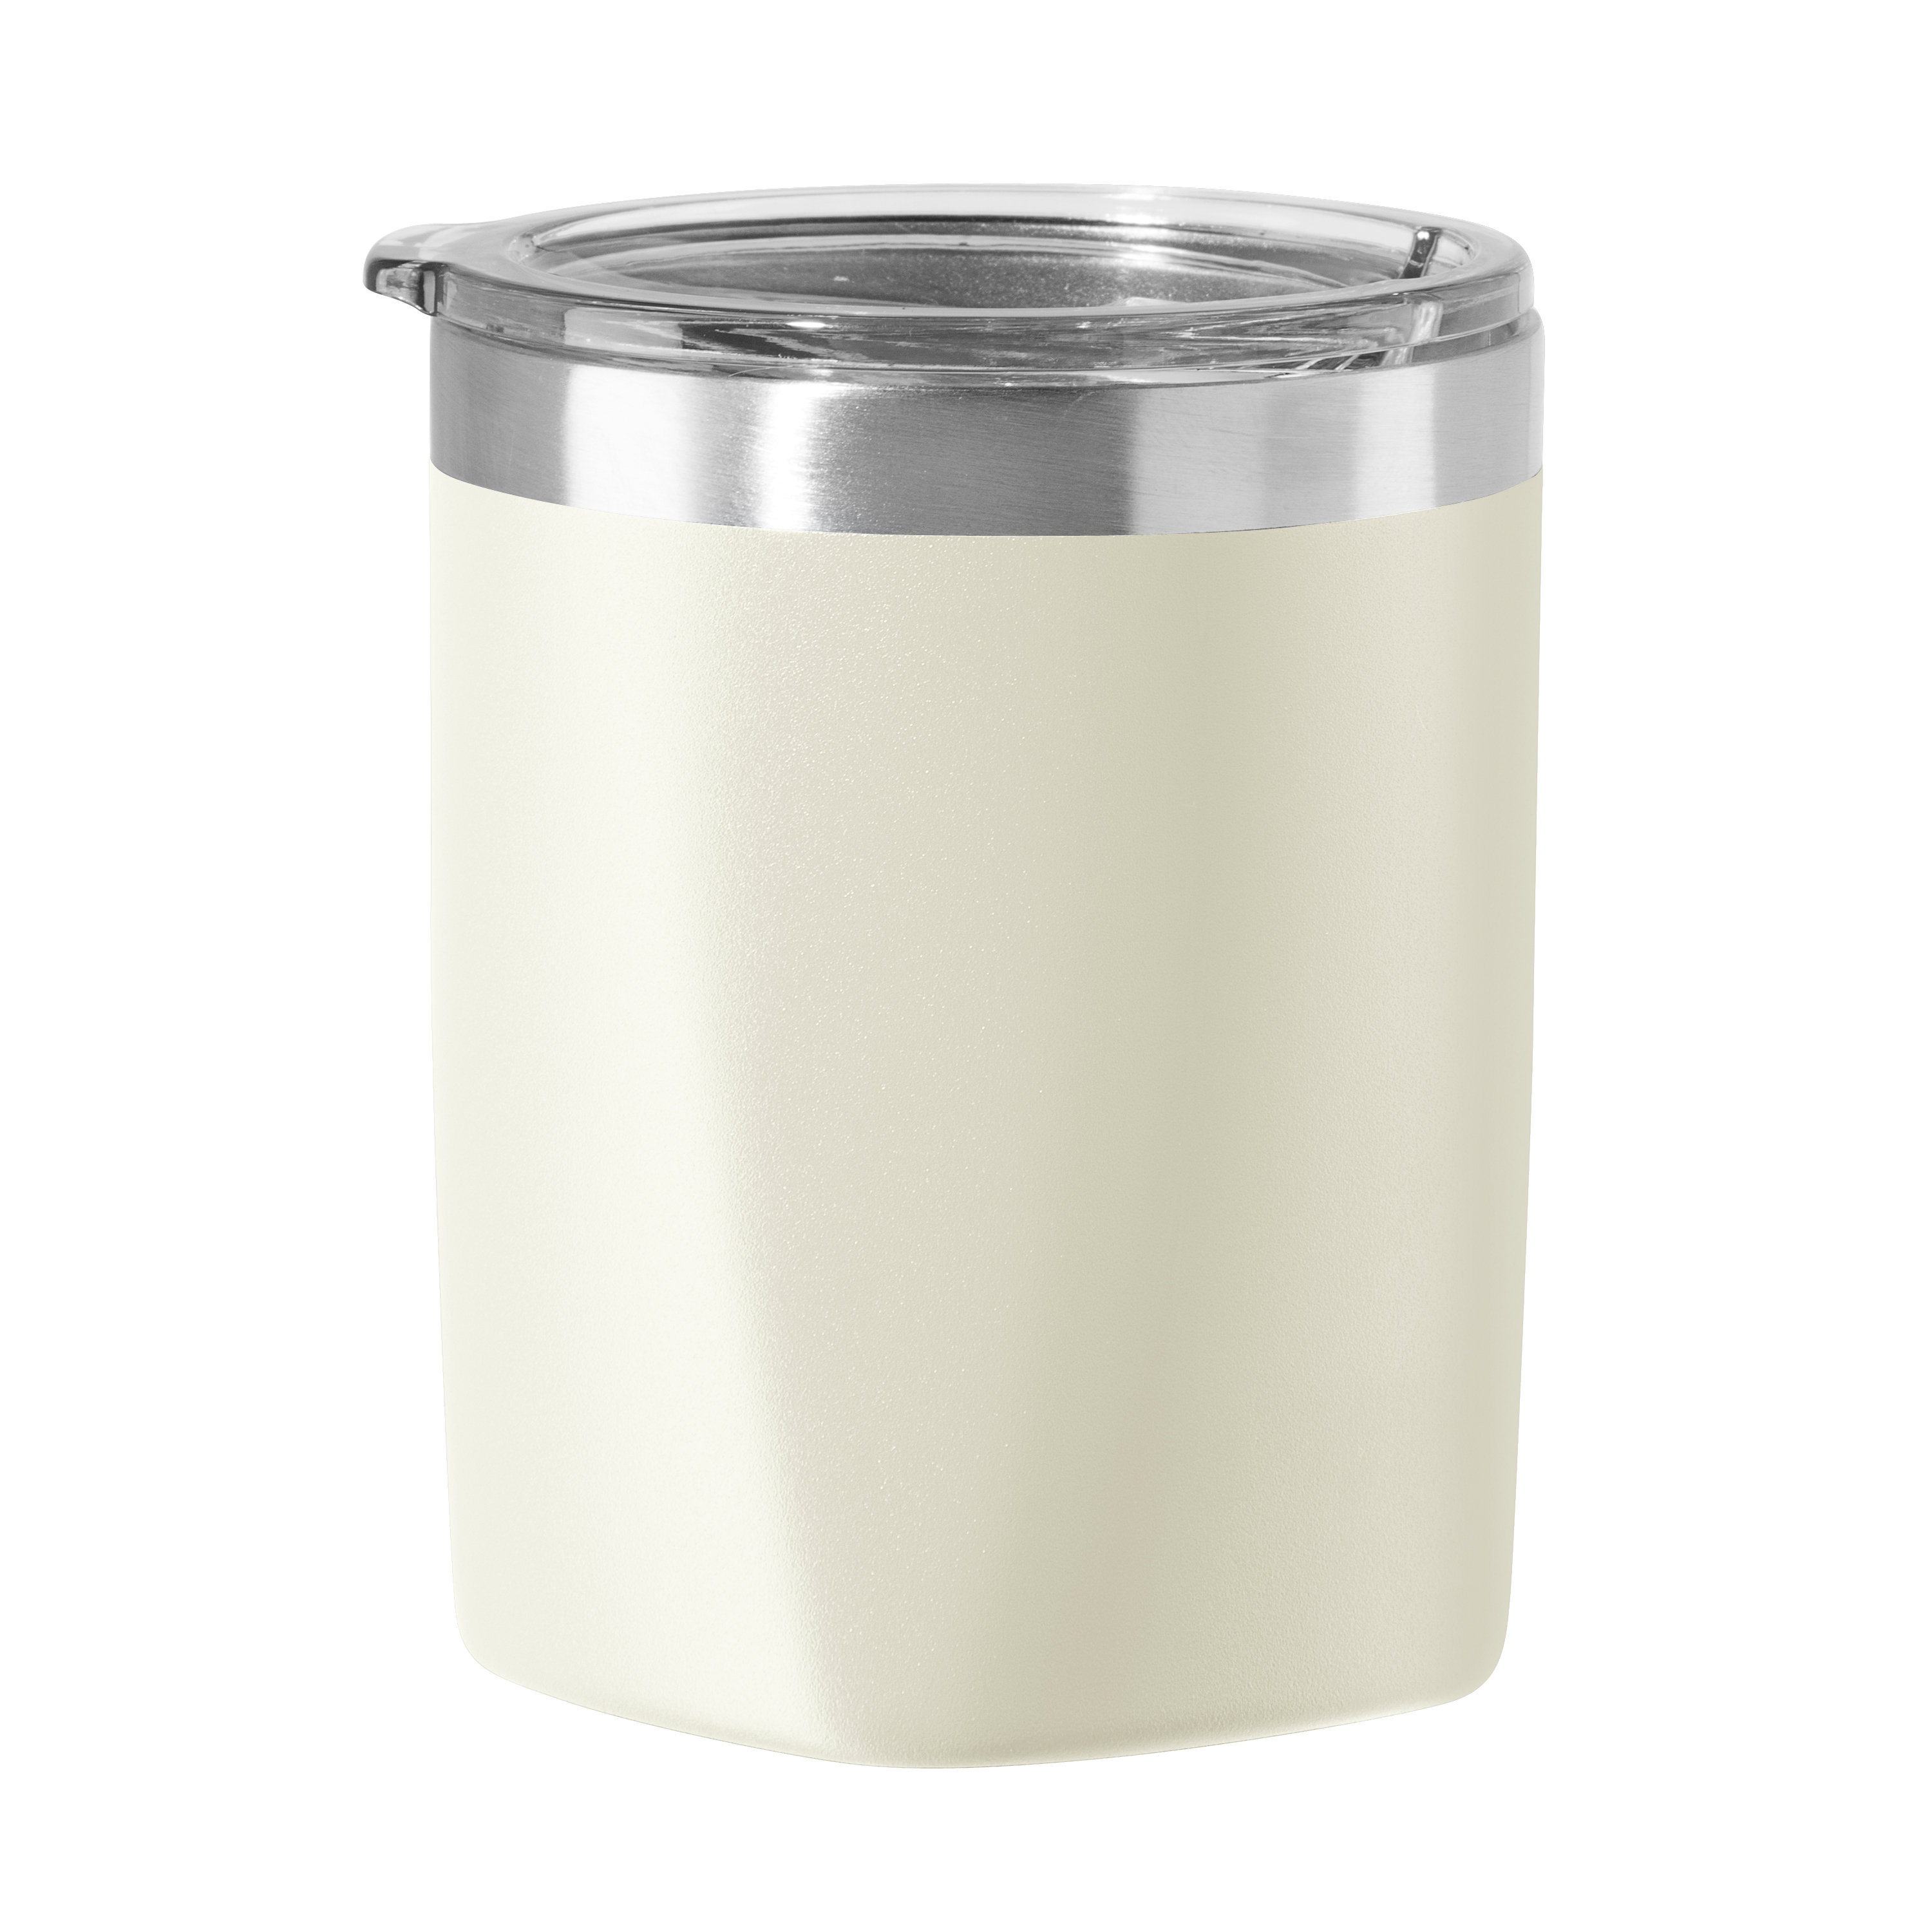 Buzio - Insulated 32oz Tumbler with Straw Lid and Flex Lid - Gray